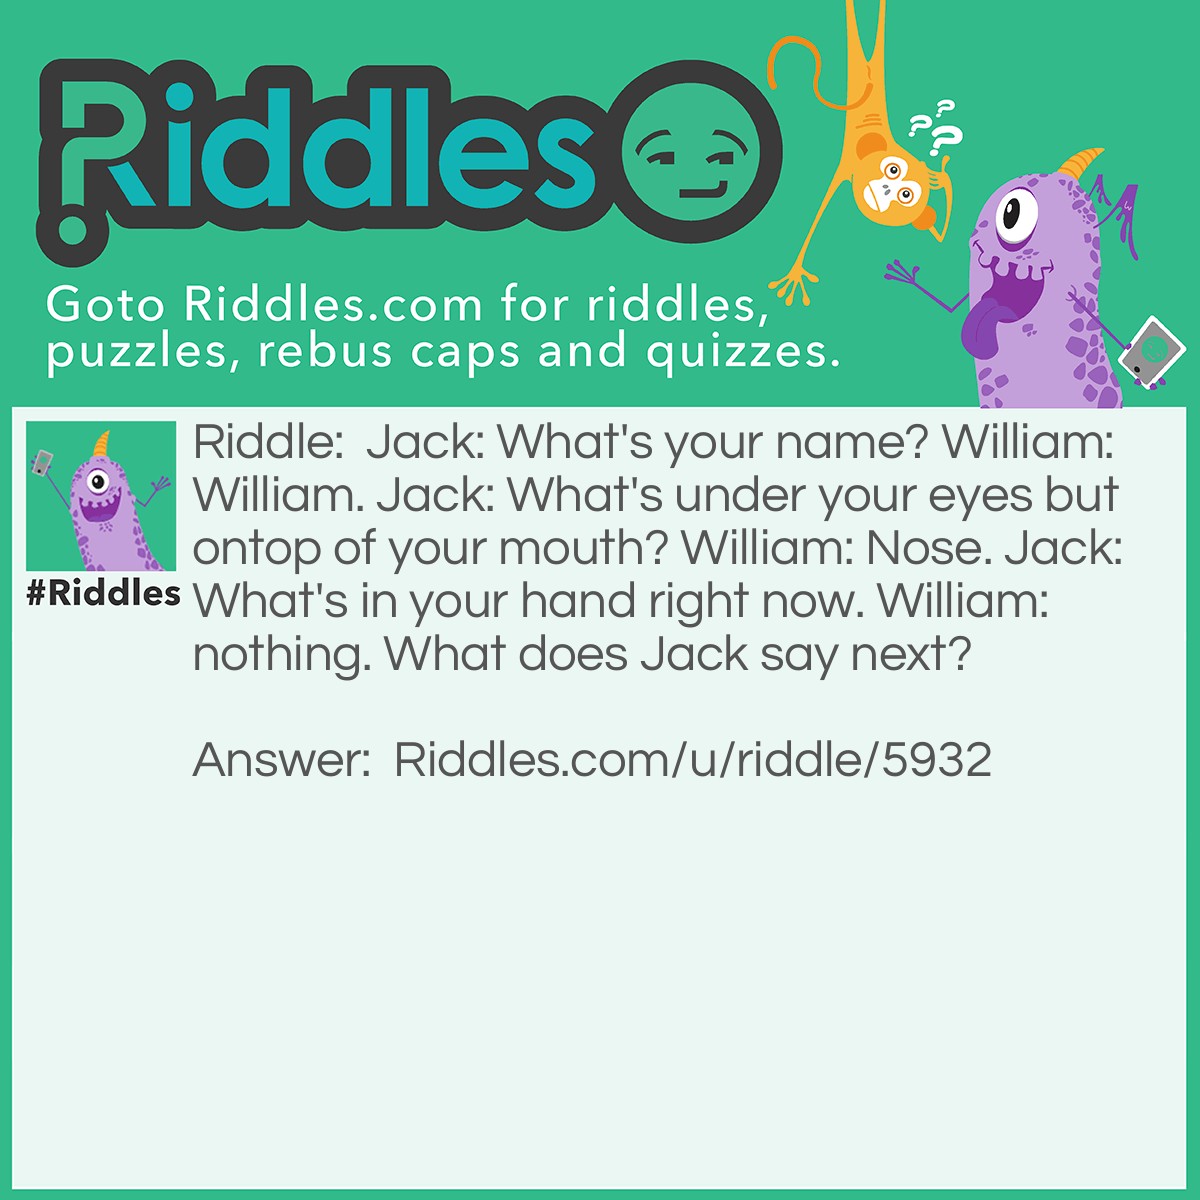 Riddle: Jack: What's your name? William: William. Jack: What's under your eyes but ontop of your mouth? William: Nose. Jack: What's in your hand right now. William: nothing. What does Jack say next? Answer: William nose nothing.